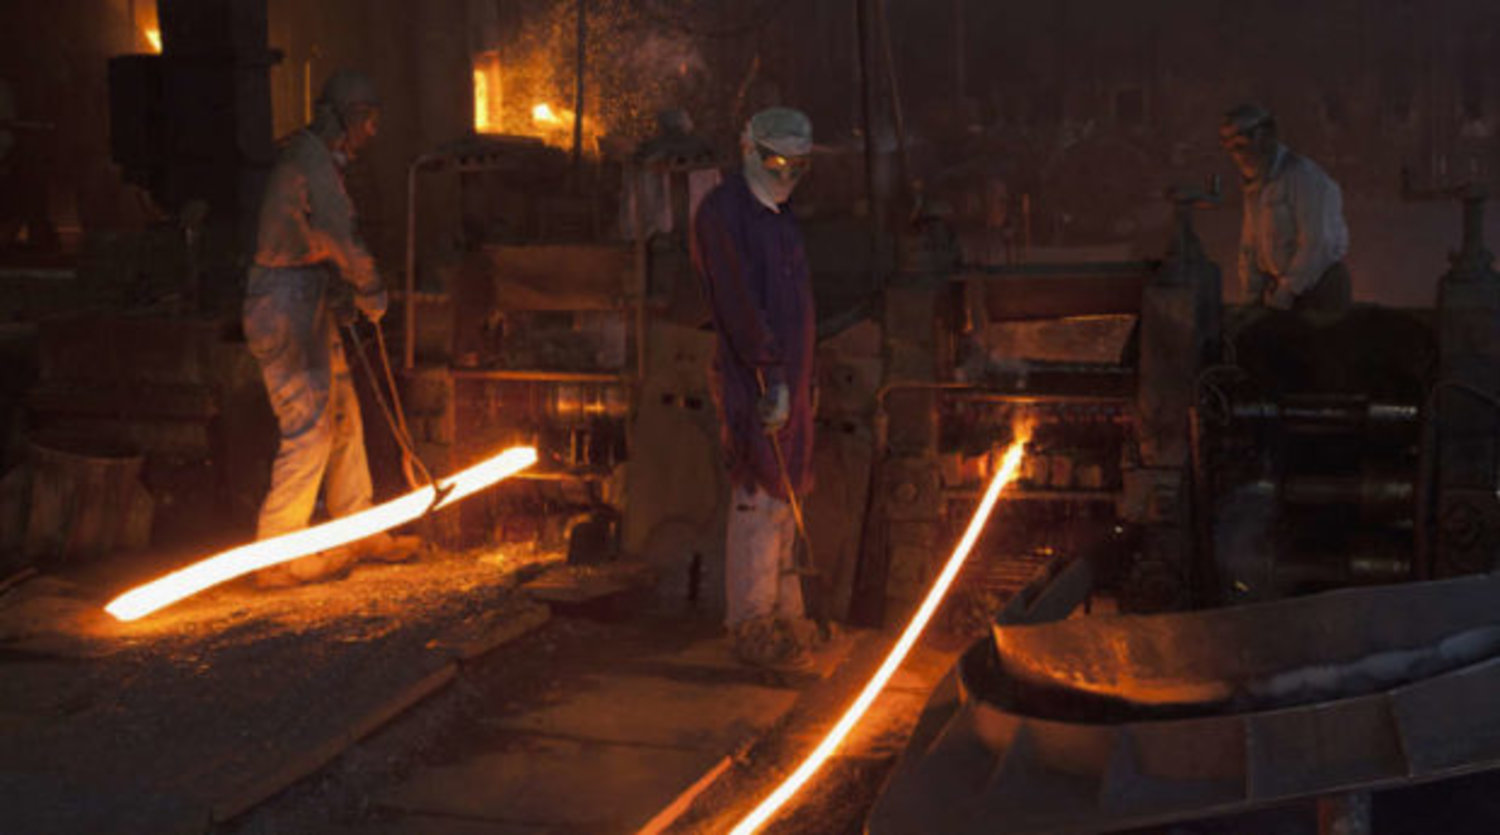 Reuters photo shows steel workers